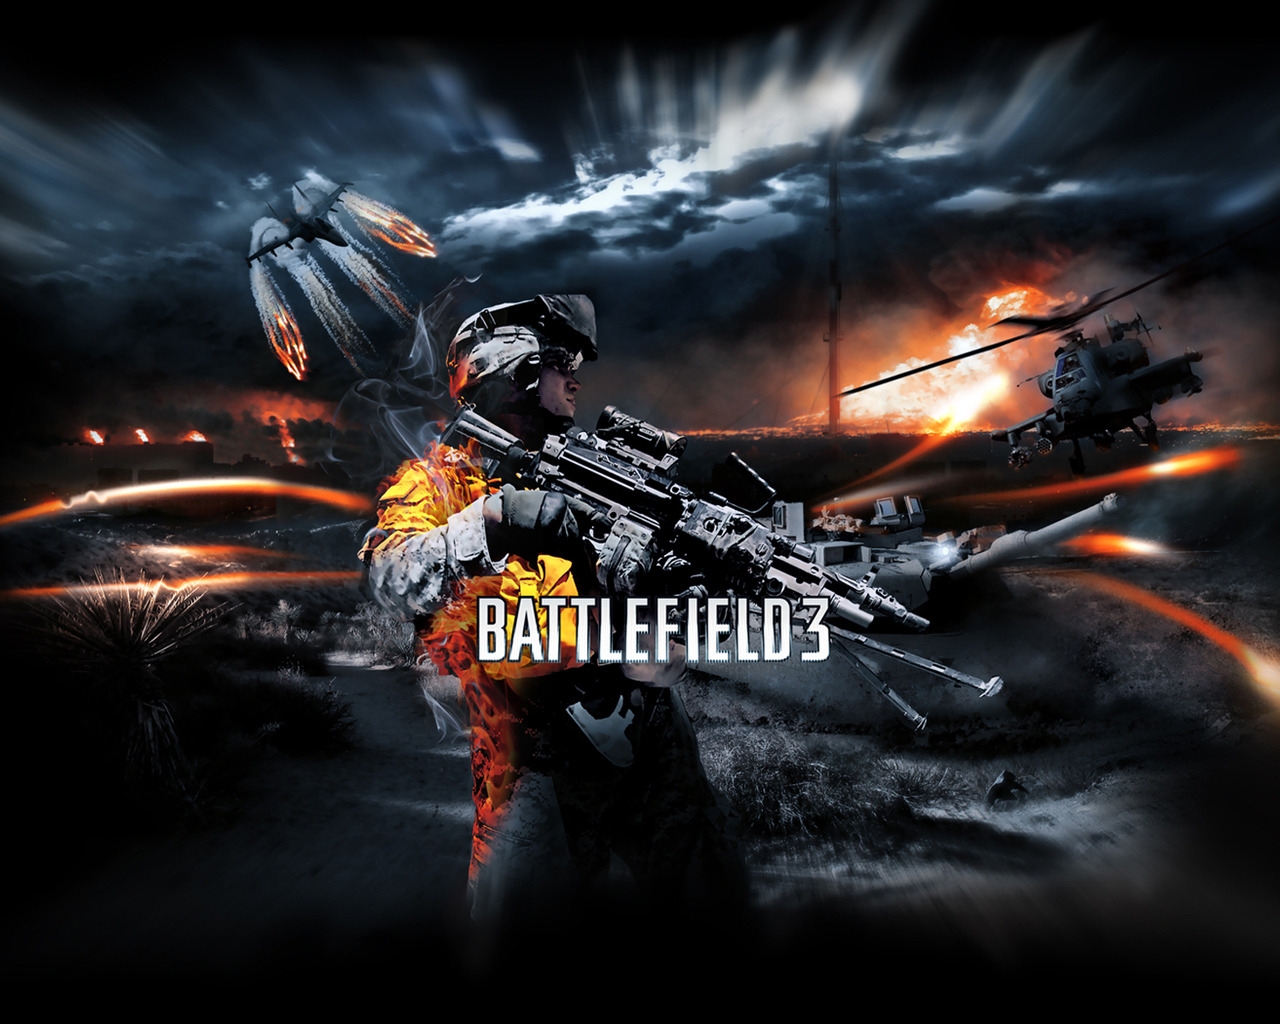 Battlefield 3 Poster for 1280 x 1024 resolution